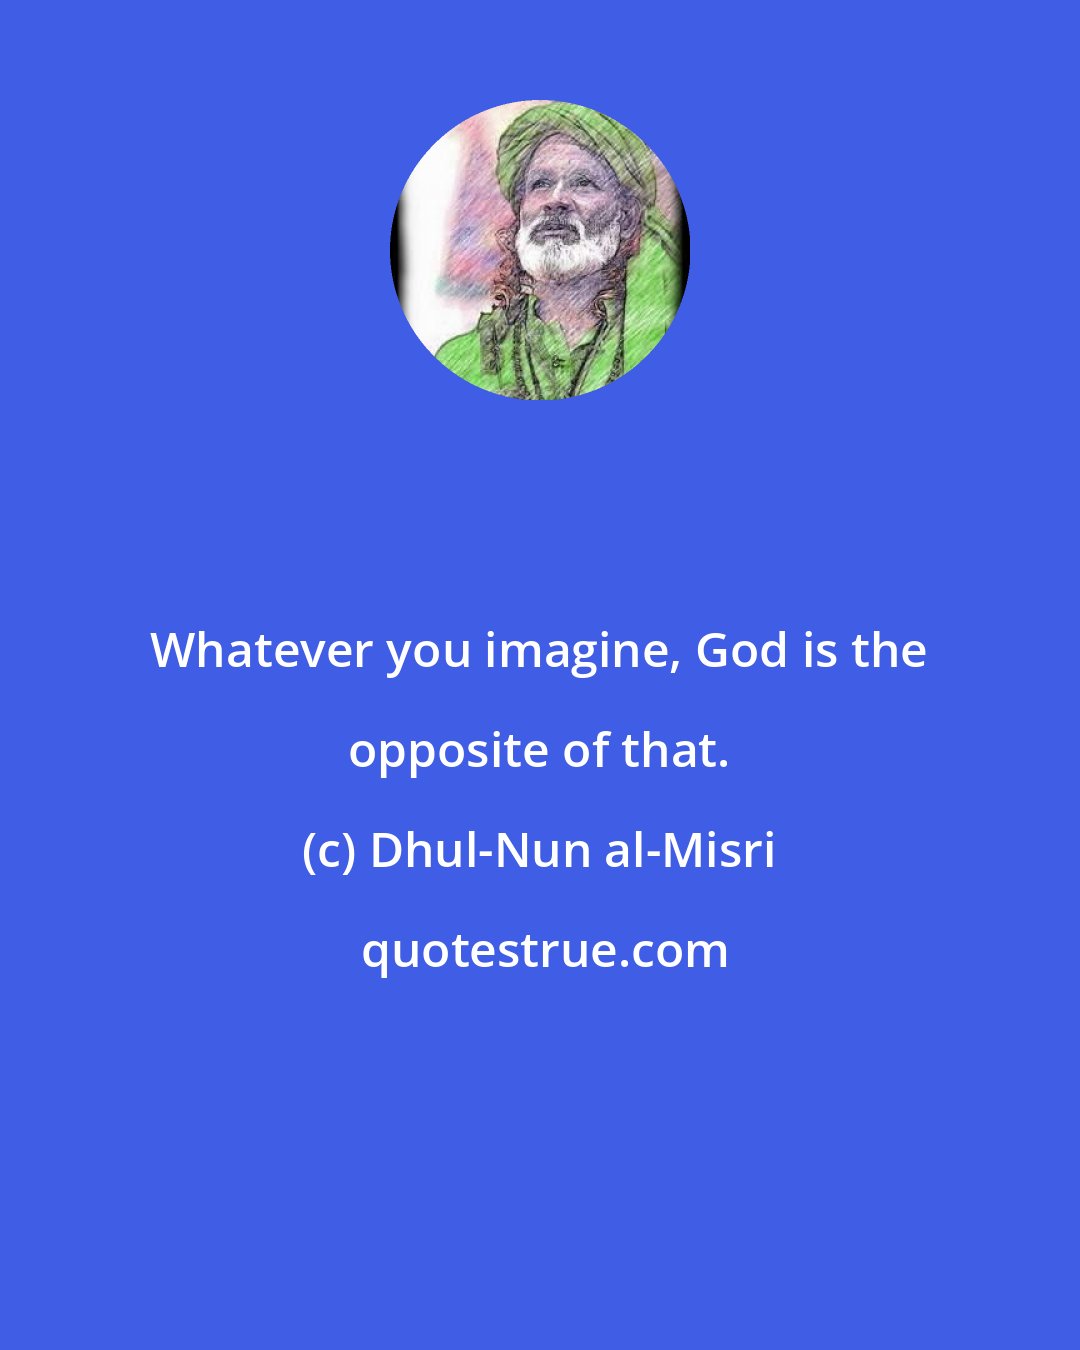 Dhul-Nun al-Misri: Whatever you imagine, God is the opposite of that.